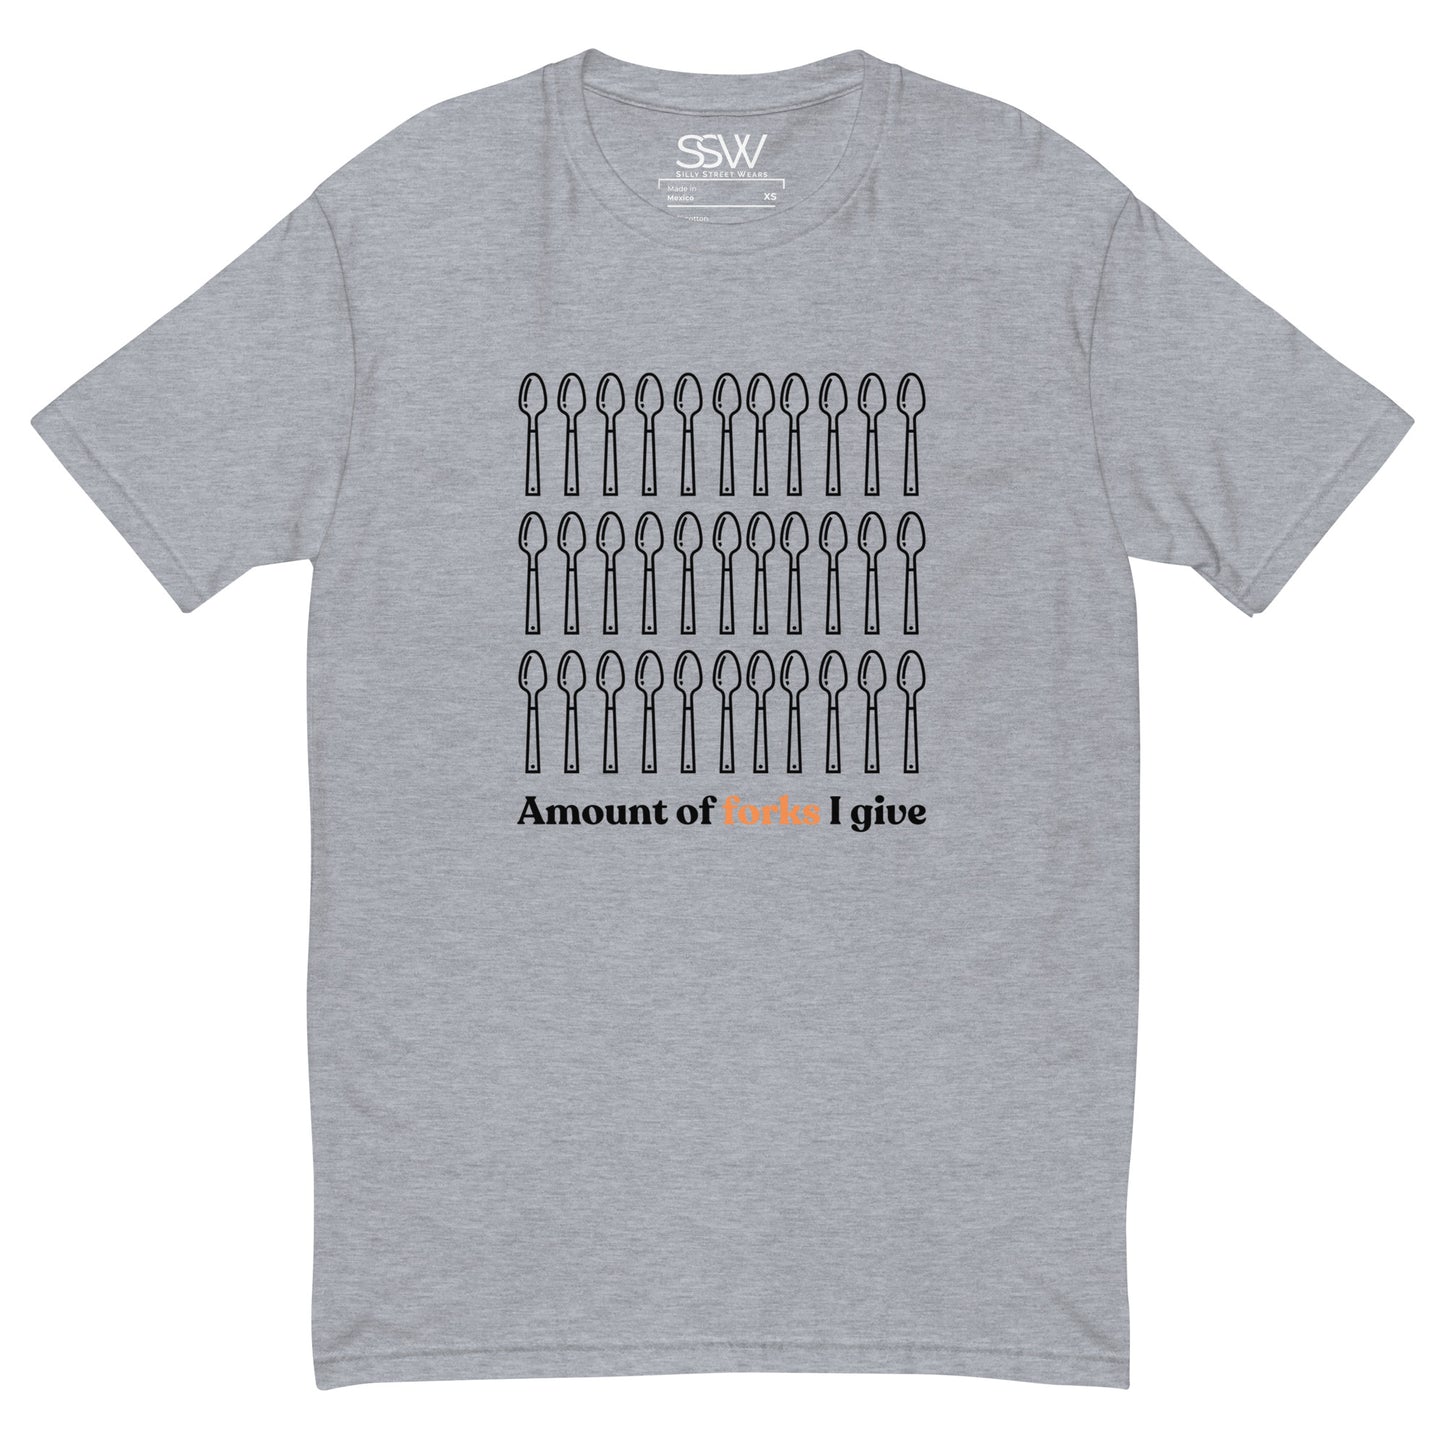 Out Of Forks Fitted T-shirt